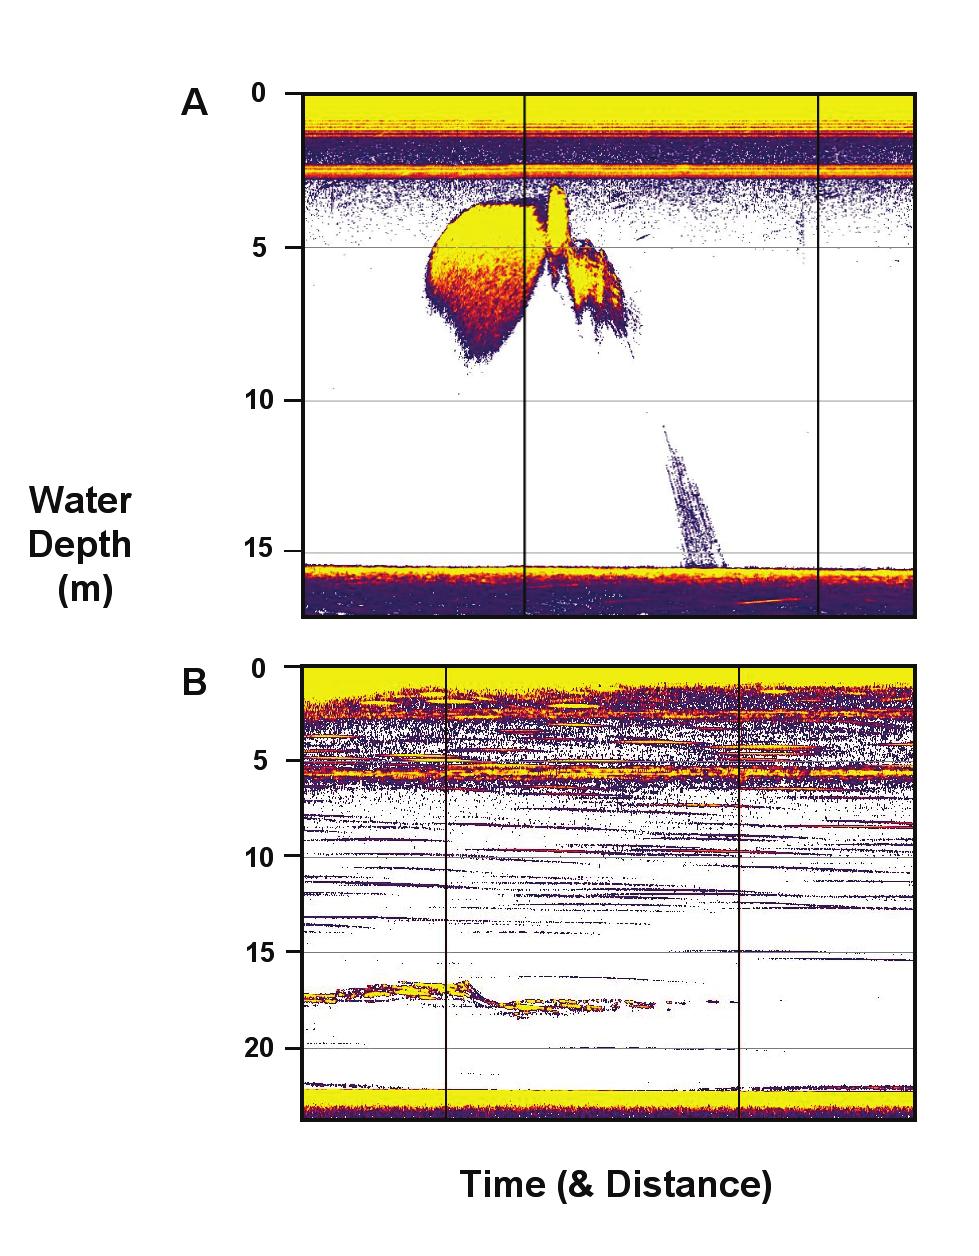 Asessing the Impact of Underwater Sounds on Fishes and Other Forms of Marine Life Figure 4: Responses of a sprat school (A, at 5 m depth) and a mackerel school (B, at 17 m depth) to sound playback,